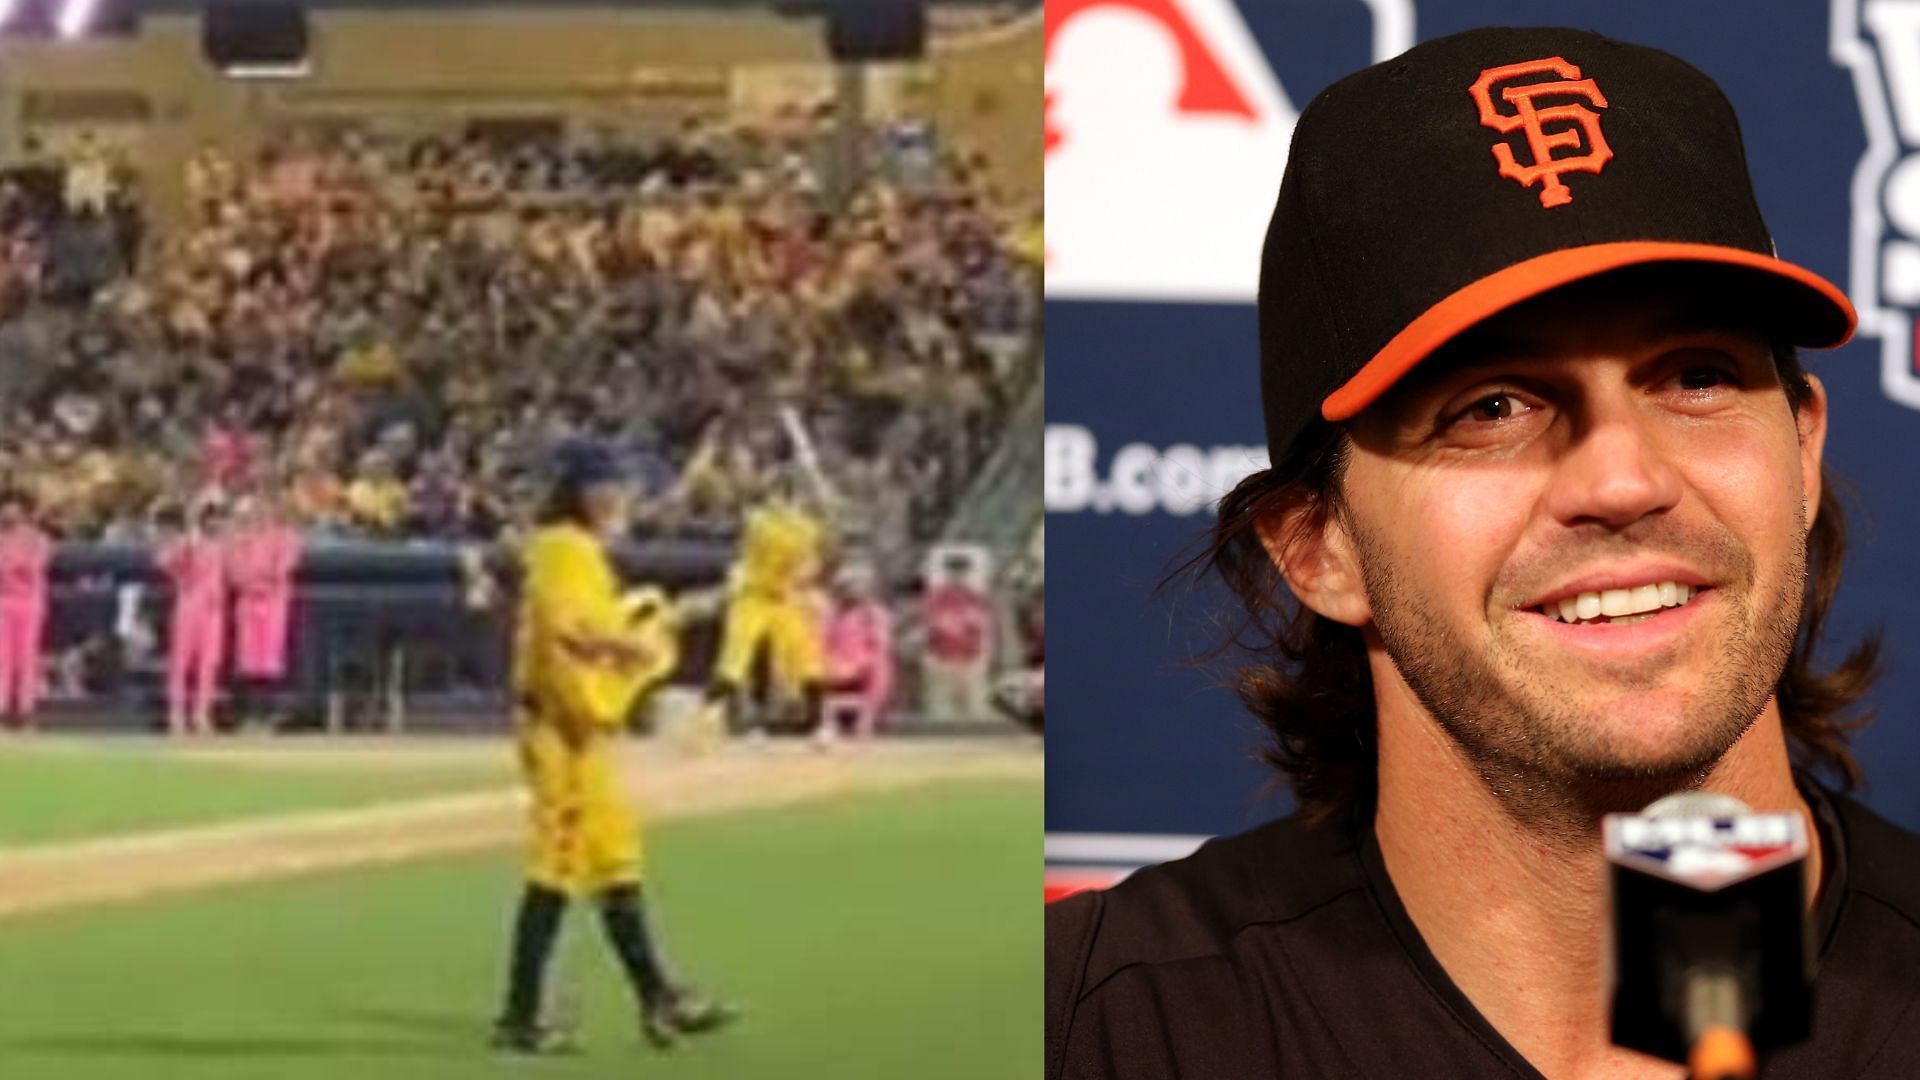 15 Years After Cy Young Award, Barry Zito Hits The Billboard